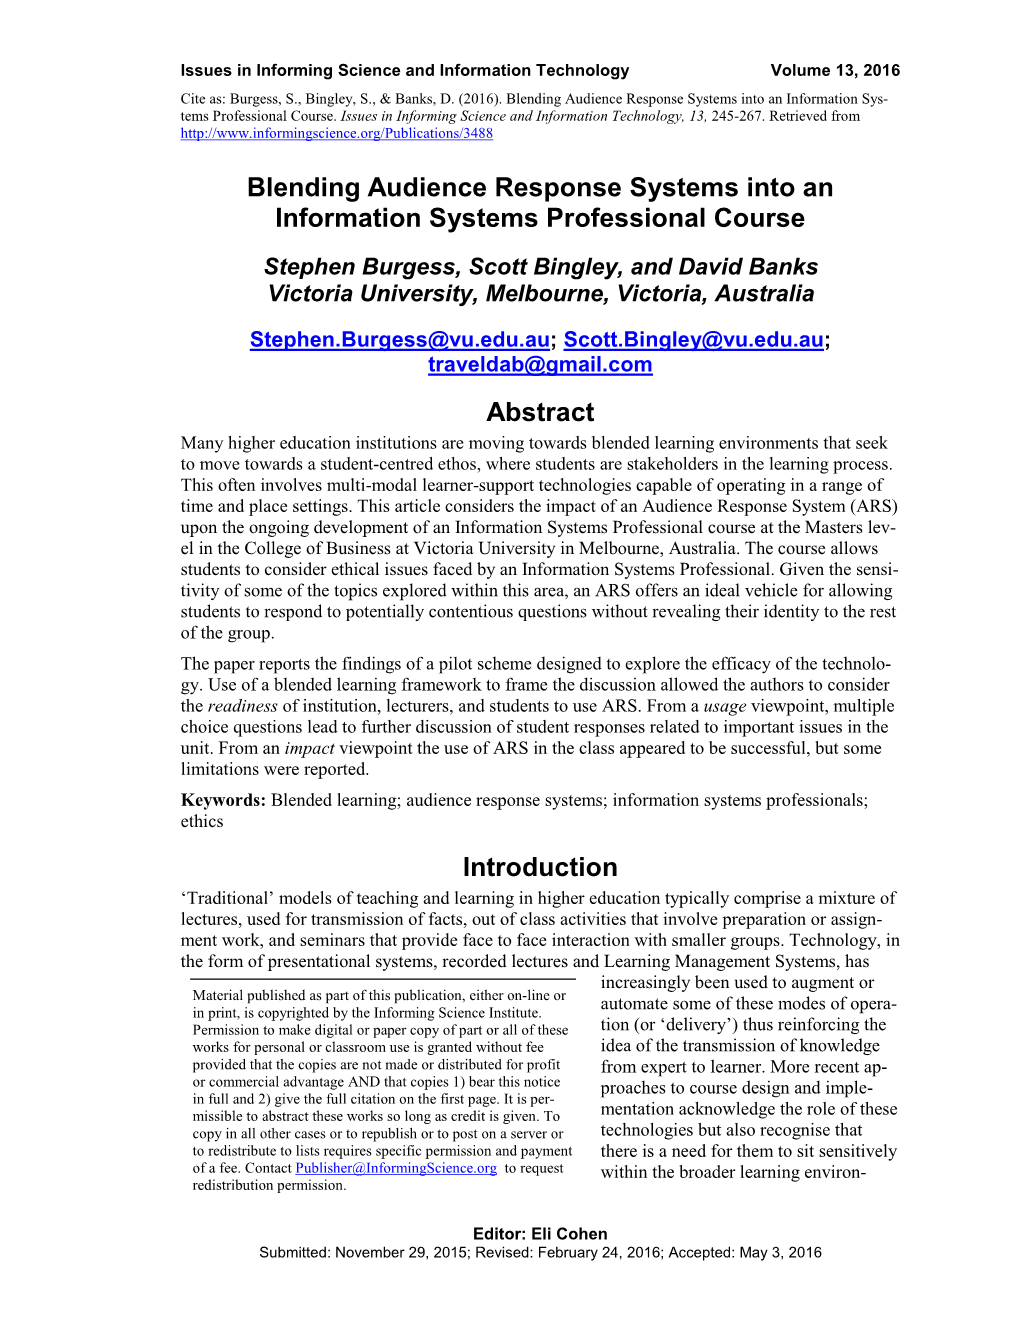 Blending Audience Response Systems Into an Information Sys- Tems Professional Course